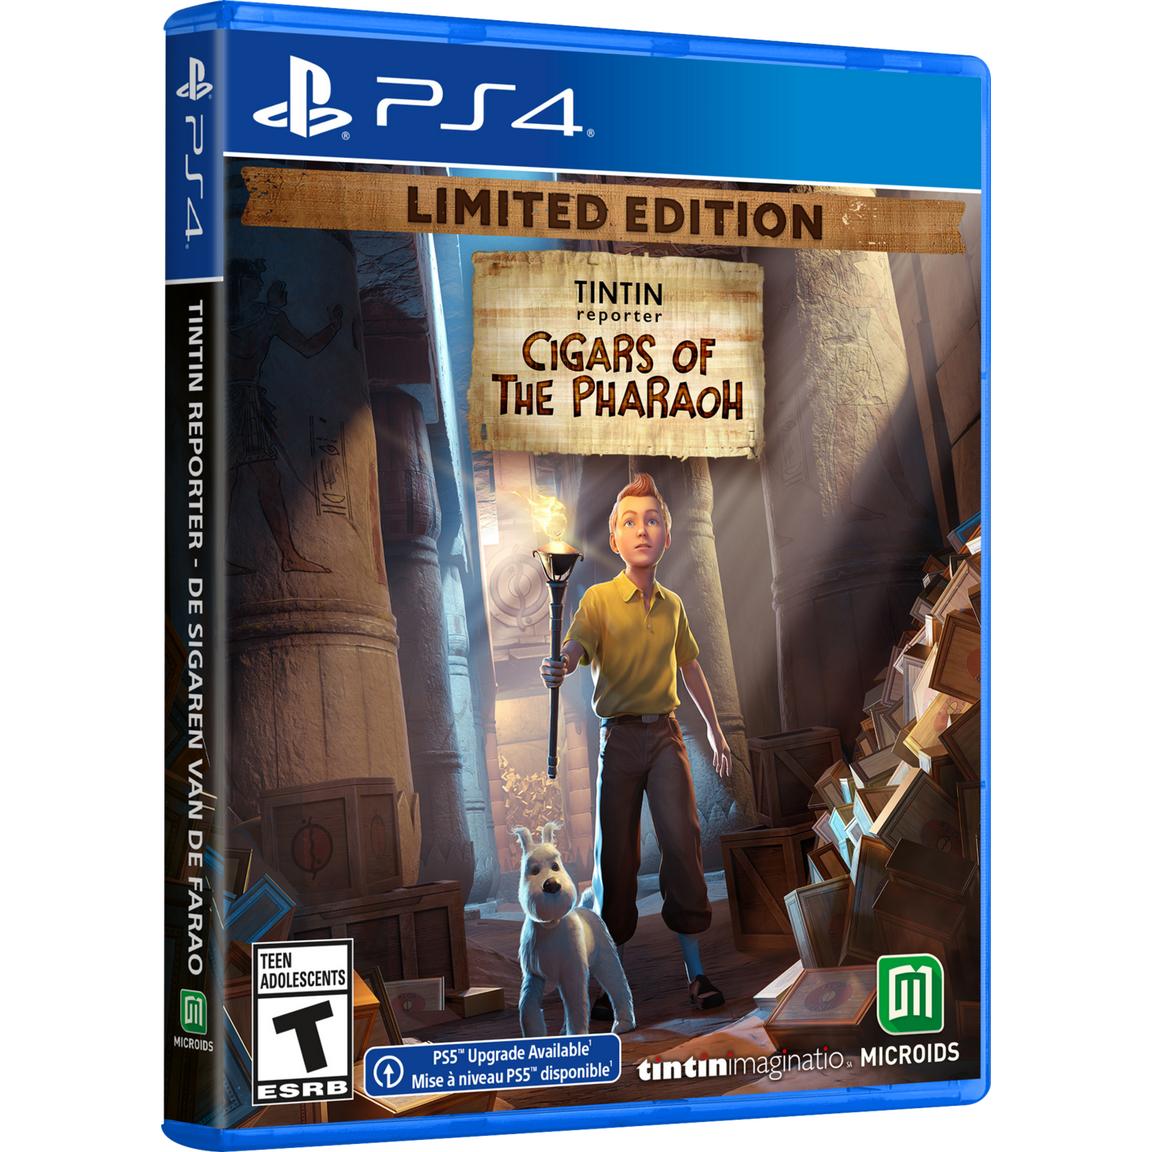 Видеоигра Tintin Reporter: Cigars of the Pharaoh Limited Edition - PlayStation 4 ps5 игра microids tintin reporter cigars of the pharaoh ли